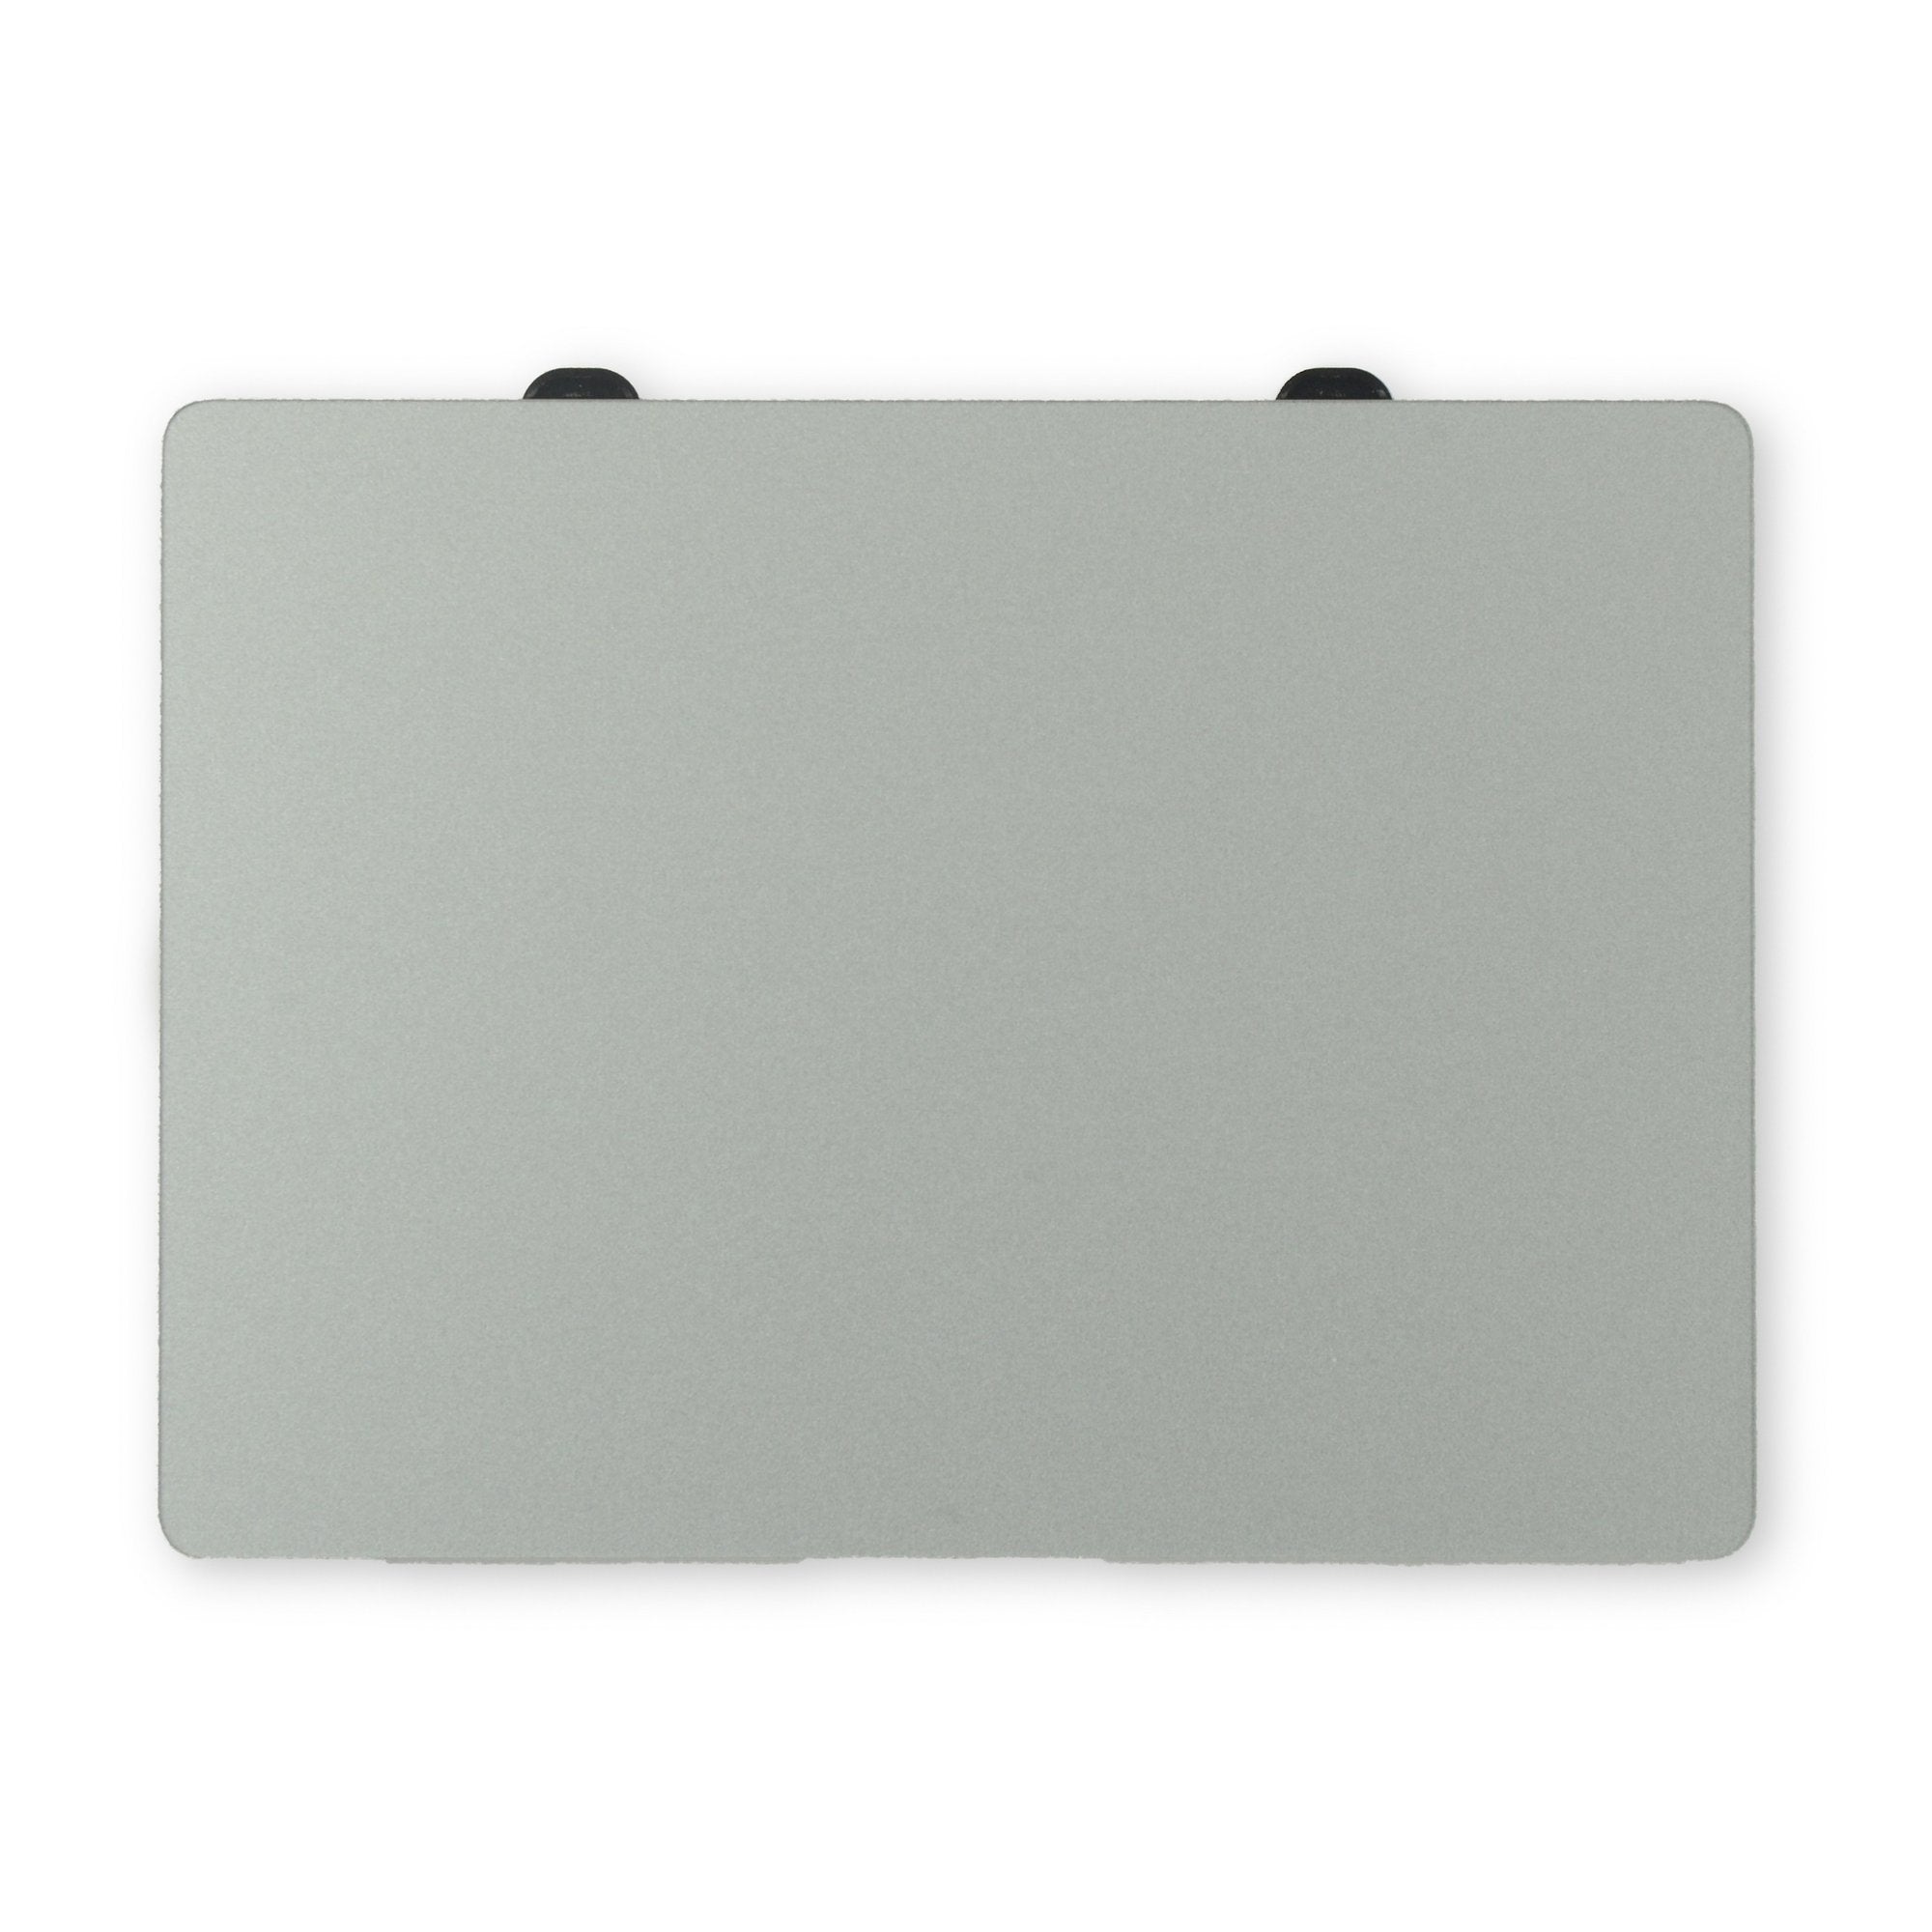 MacBook Pro 15" Retina (Mid 2012-Early 2013) Trackpad New Without Cable